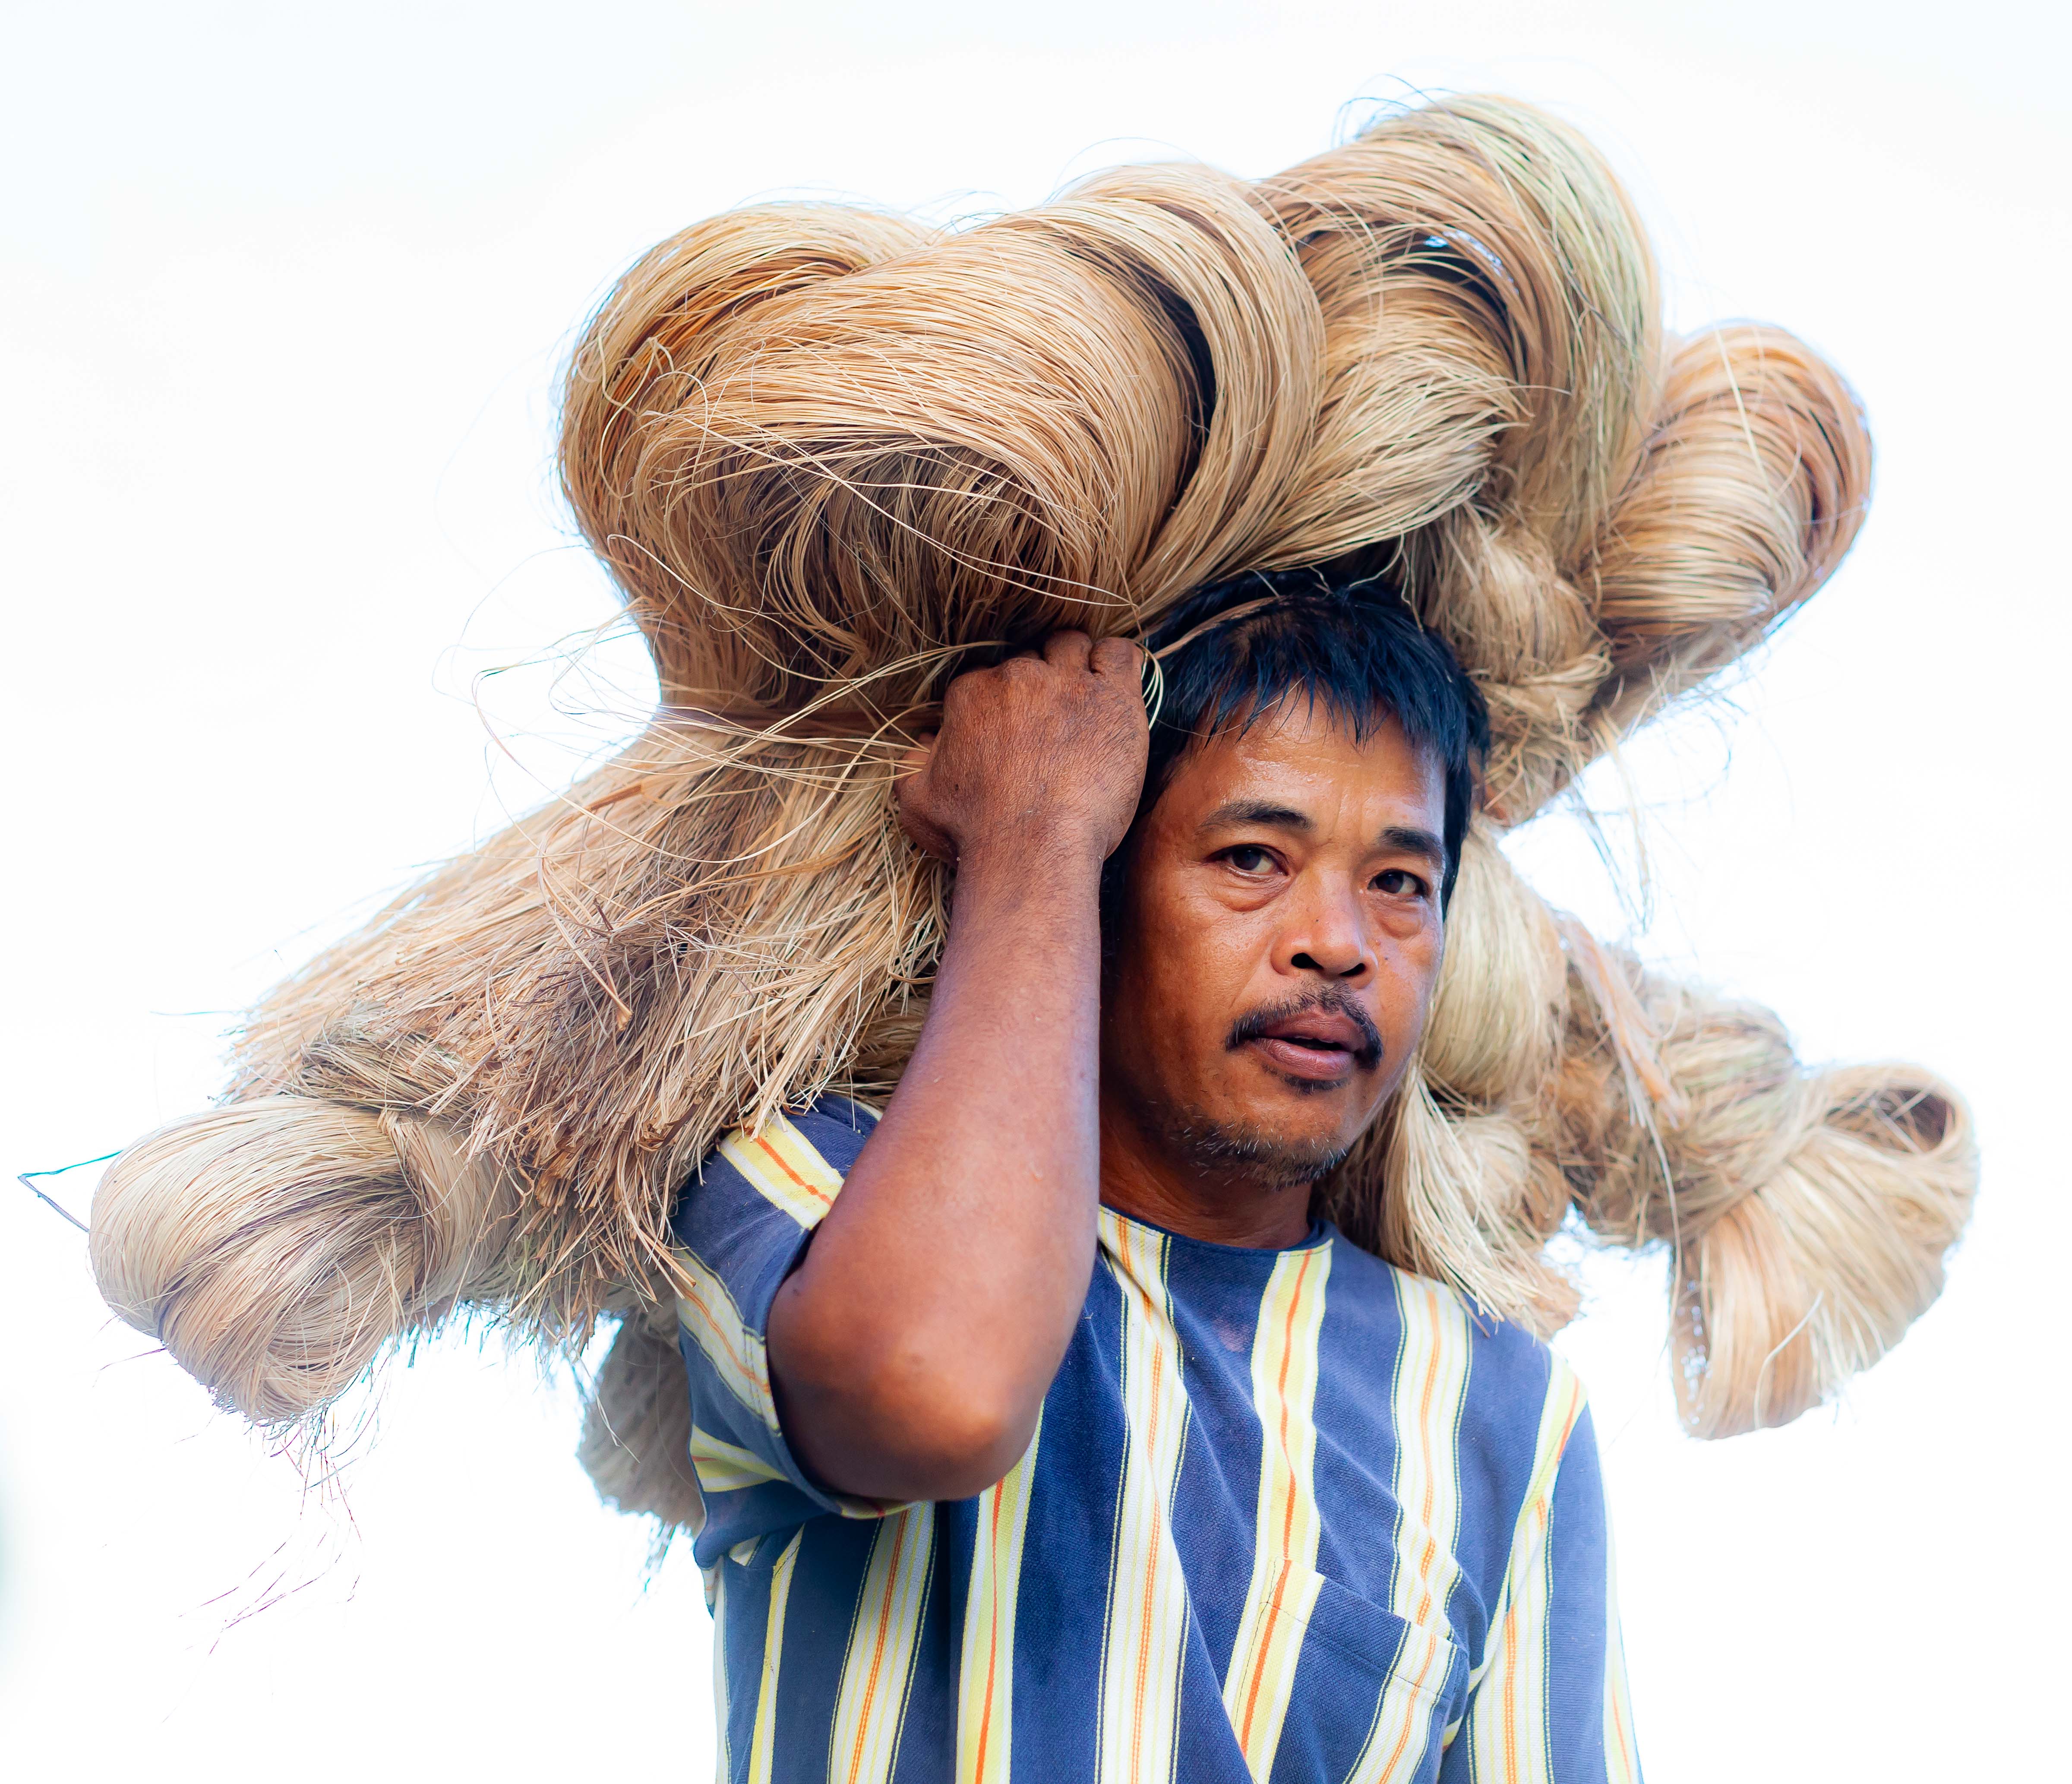 Philippines, Catanduanes Prov, Man With Sisal, 2011, IMG 0565